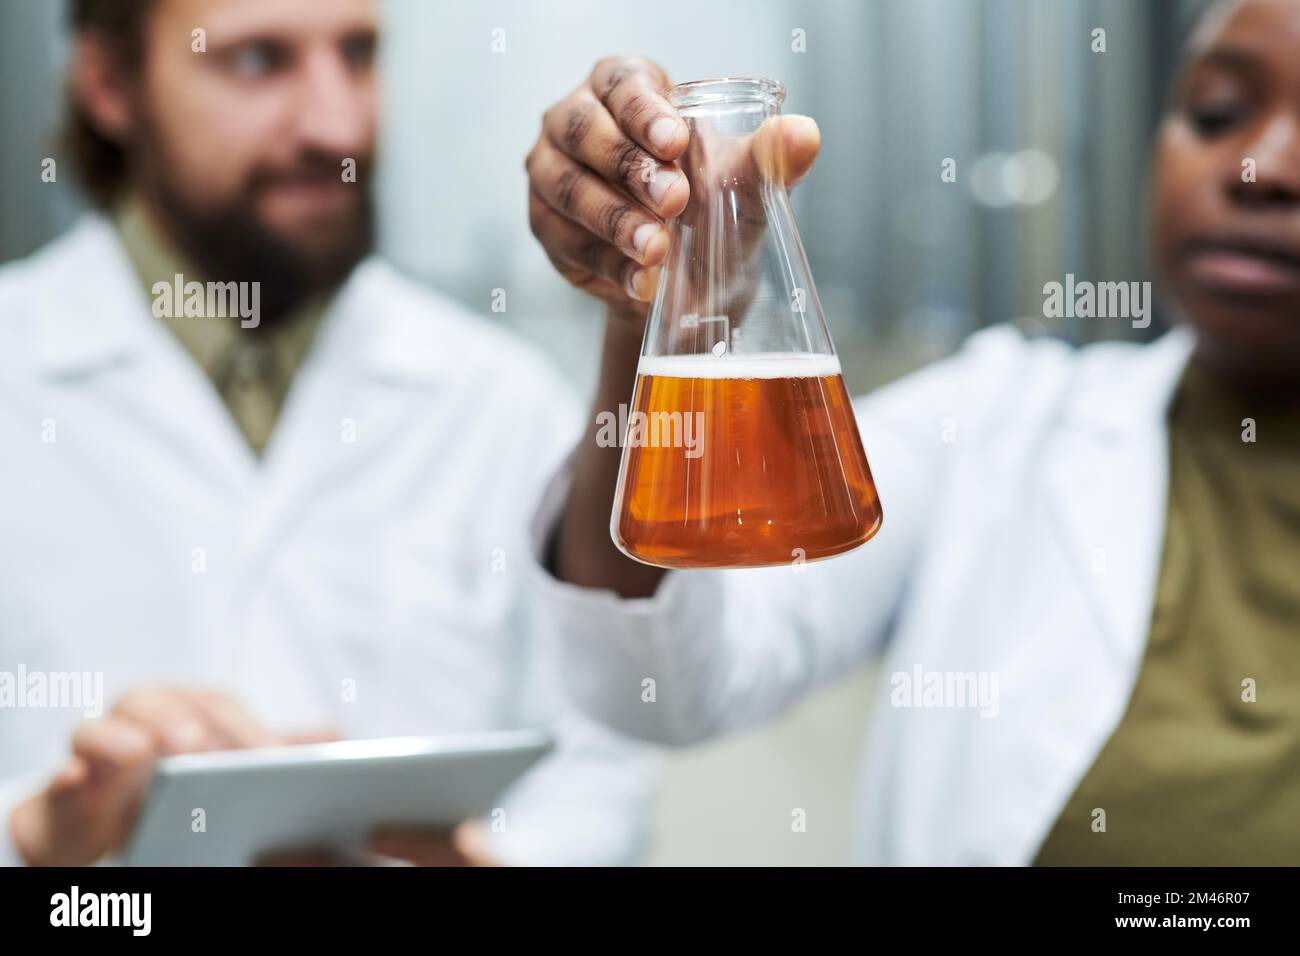 Flask with beer produced at private brewery being checked by inspectors Stock Photo